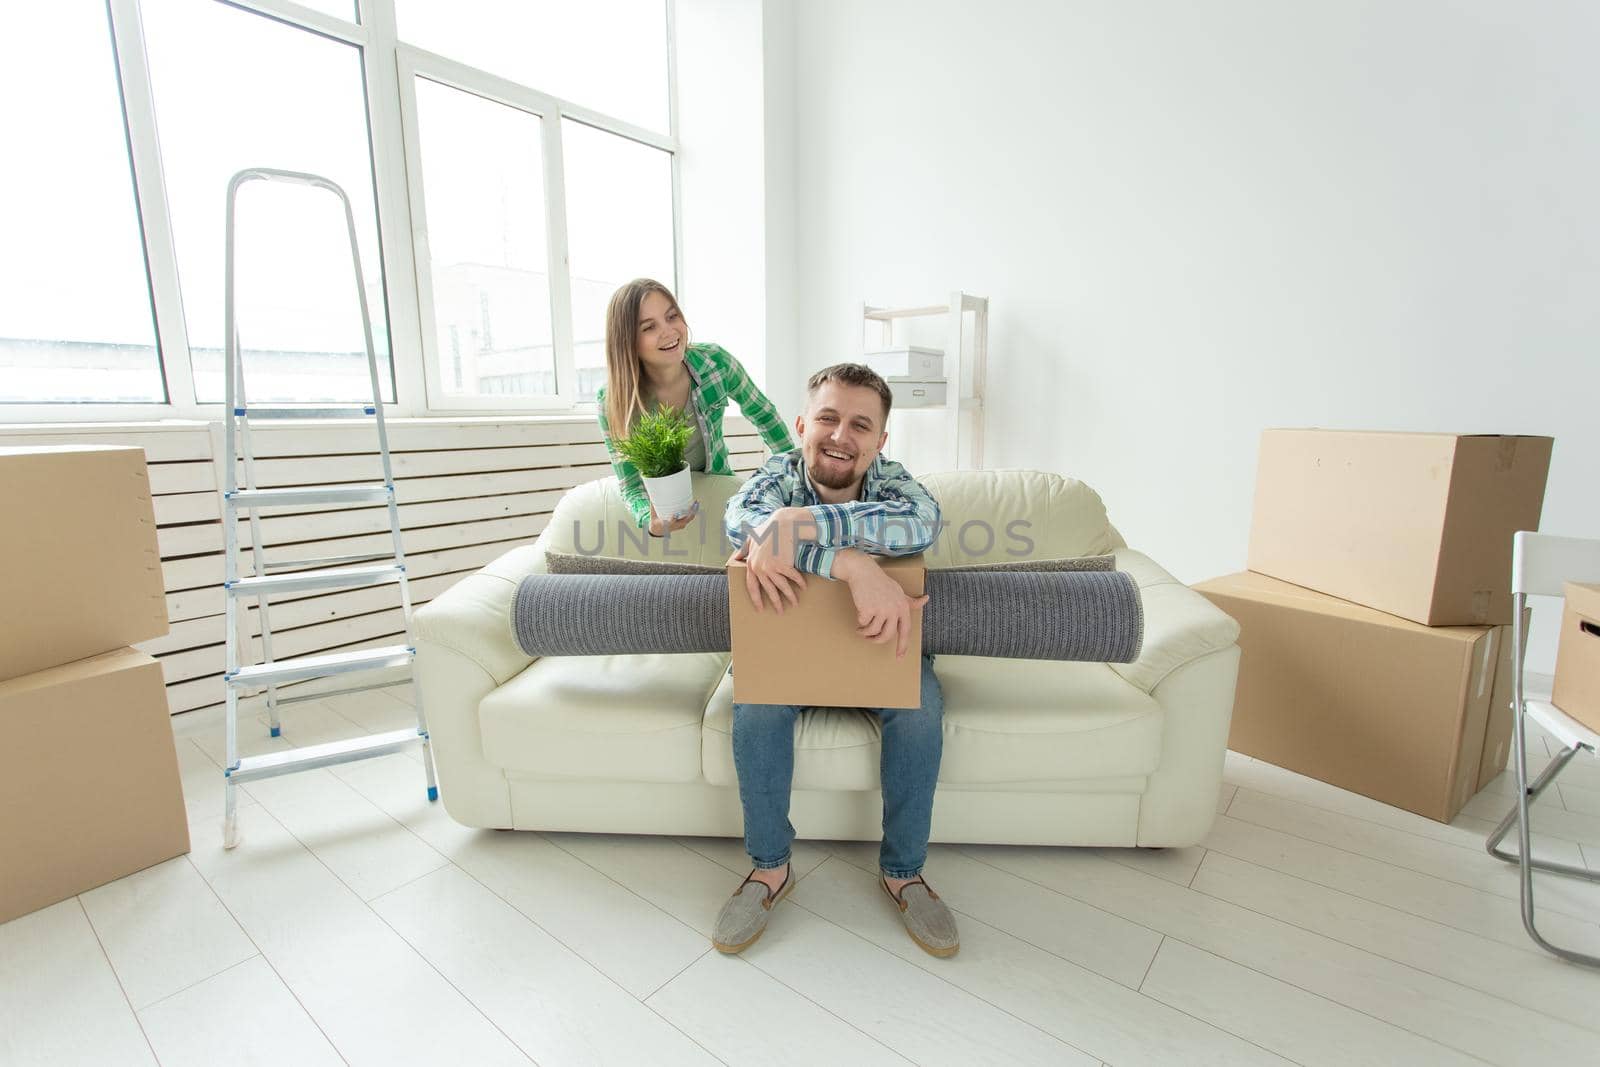 Cheerful young couple rejoices in moving to a new home laying out their belongings in the living room. Concept of housewarming and mortgages for a young family.